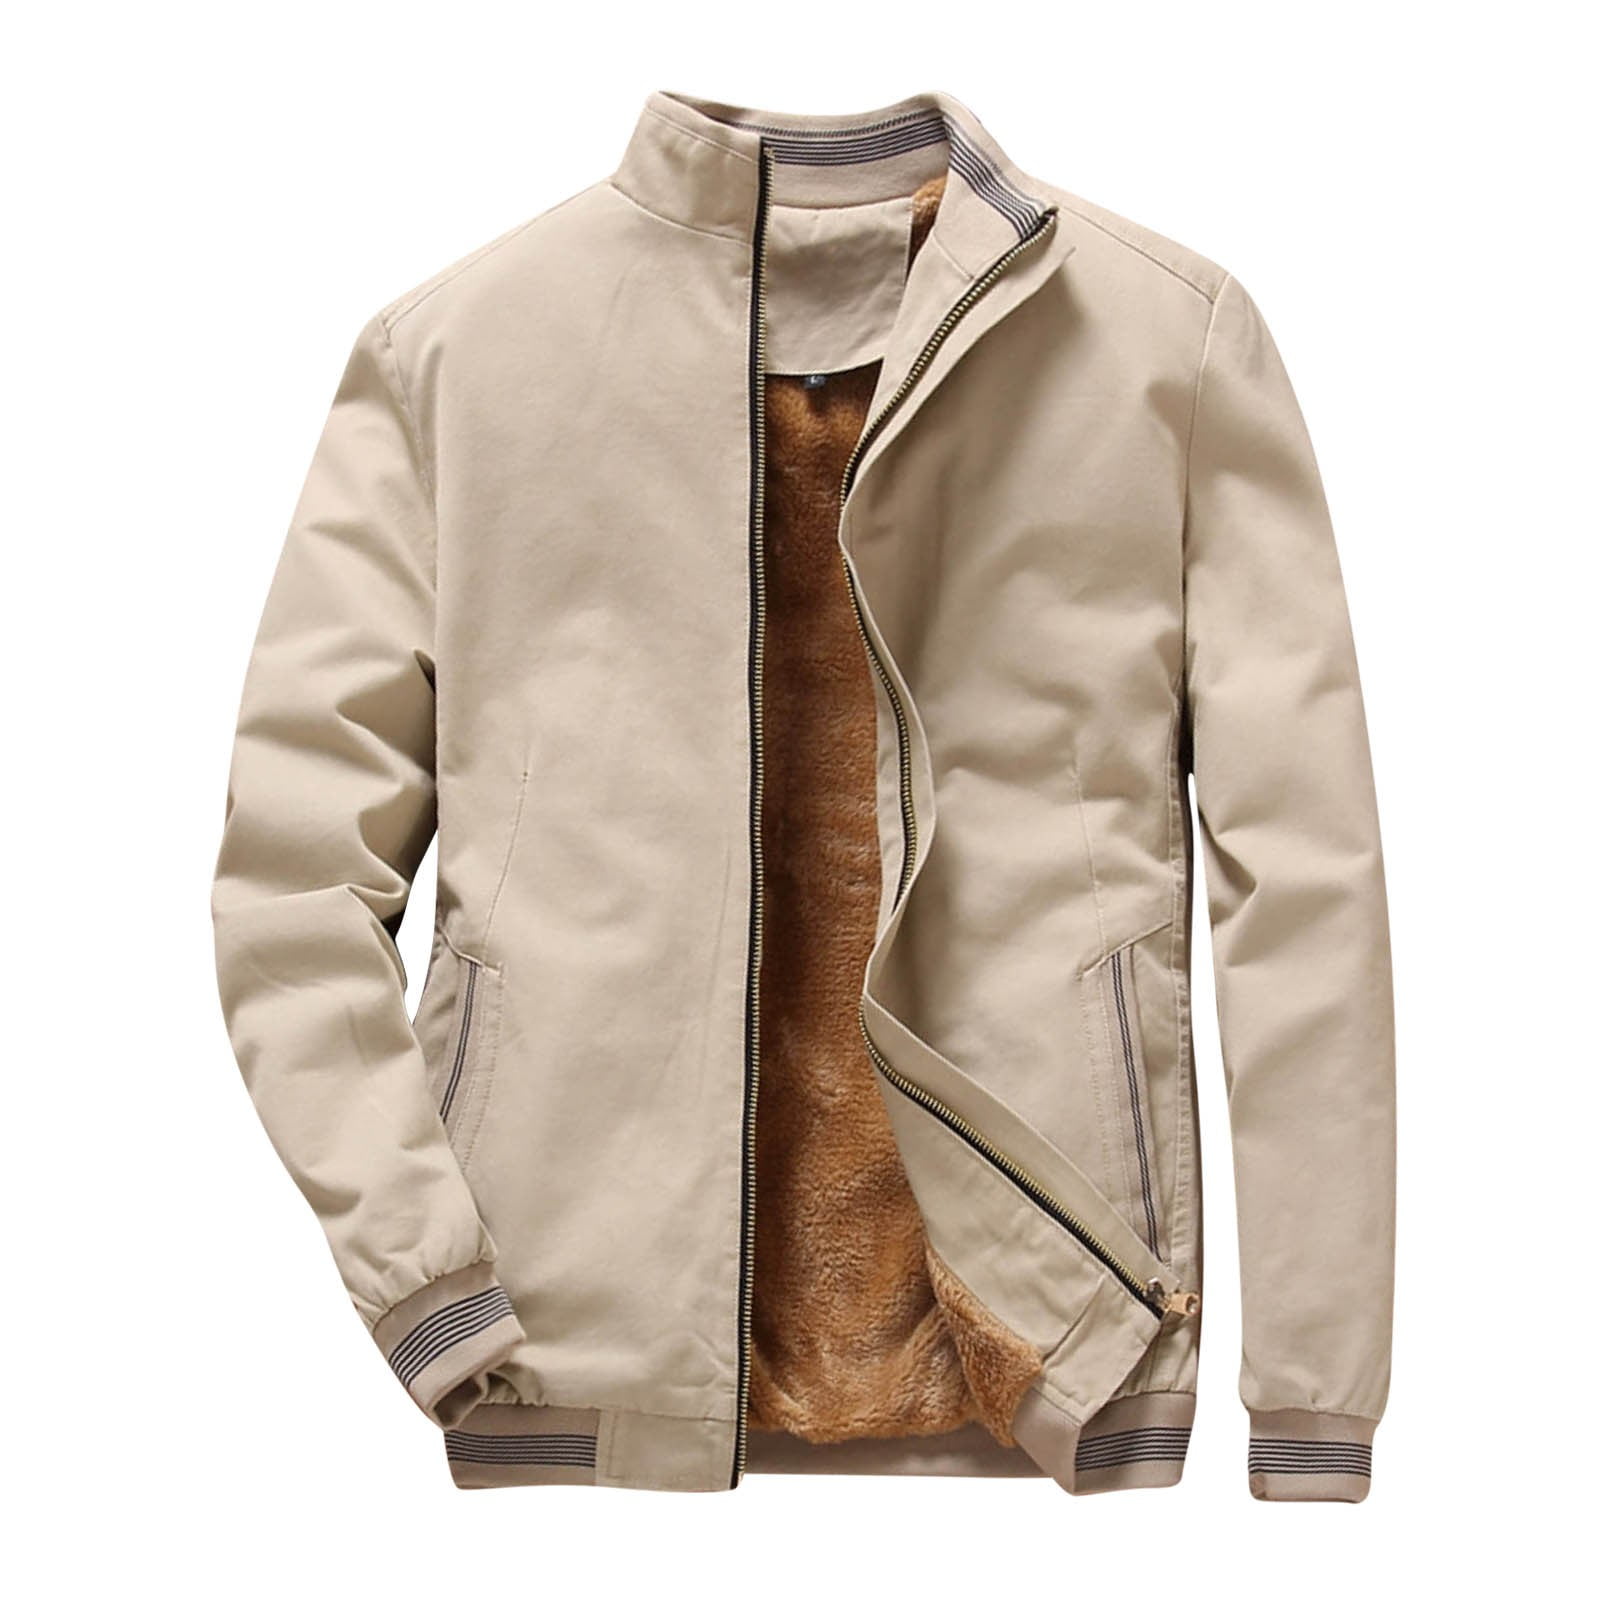 HSMQHJWE Bomber Jackets Cotton Canvas Jacket Men Autumn And Winter Plus  Size Winter Coat Lapel Collar Padded Leather Jacket Vintage Thicken Coat